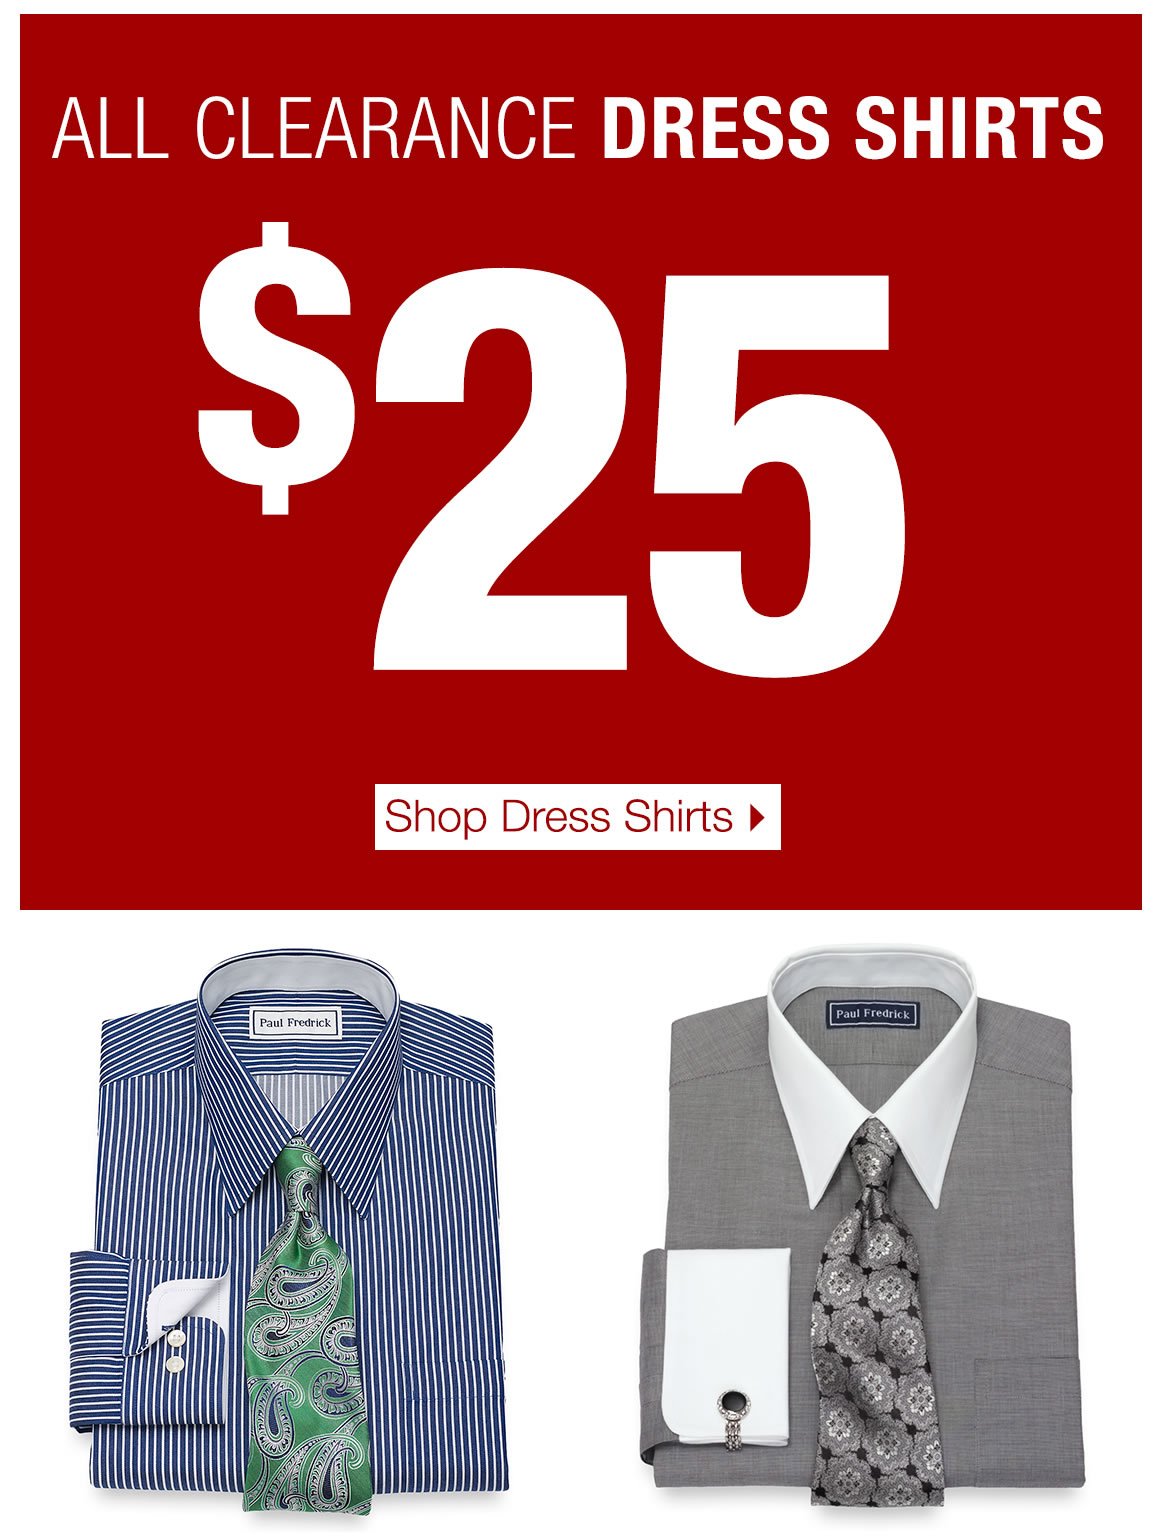 Paul Fredrick: All Clearance Dress Shirts $25! Hurry Before They're ...